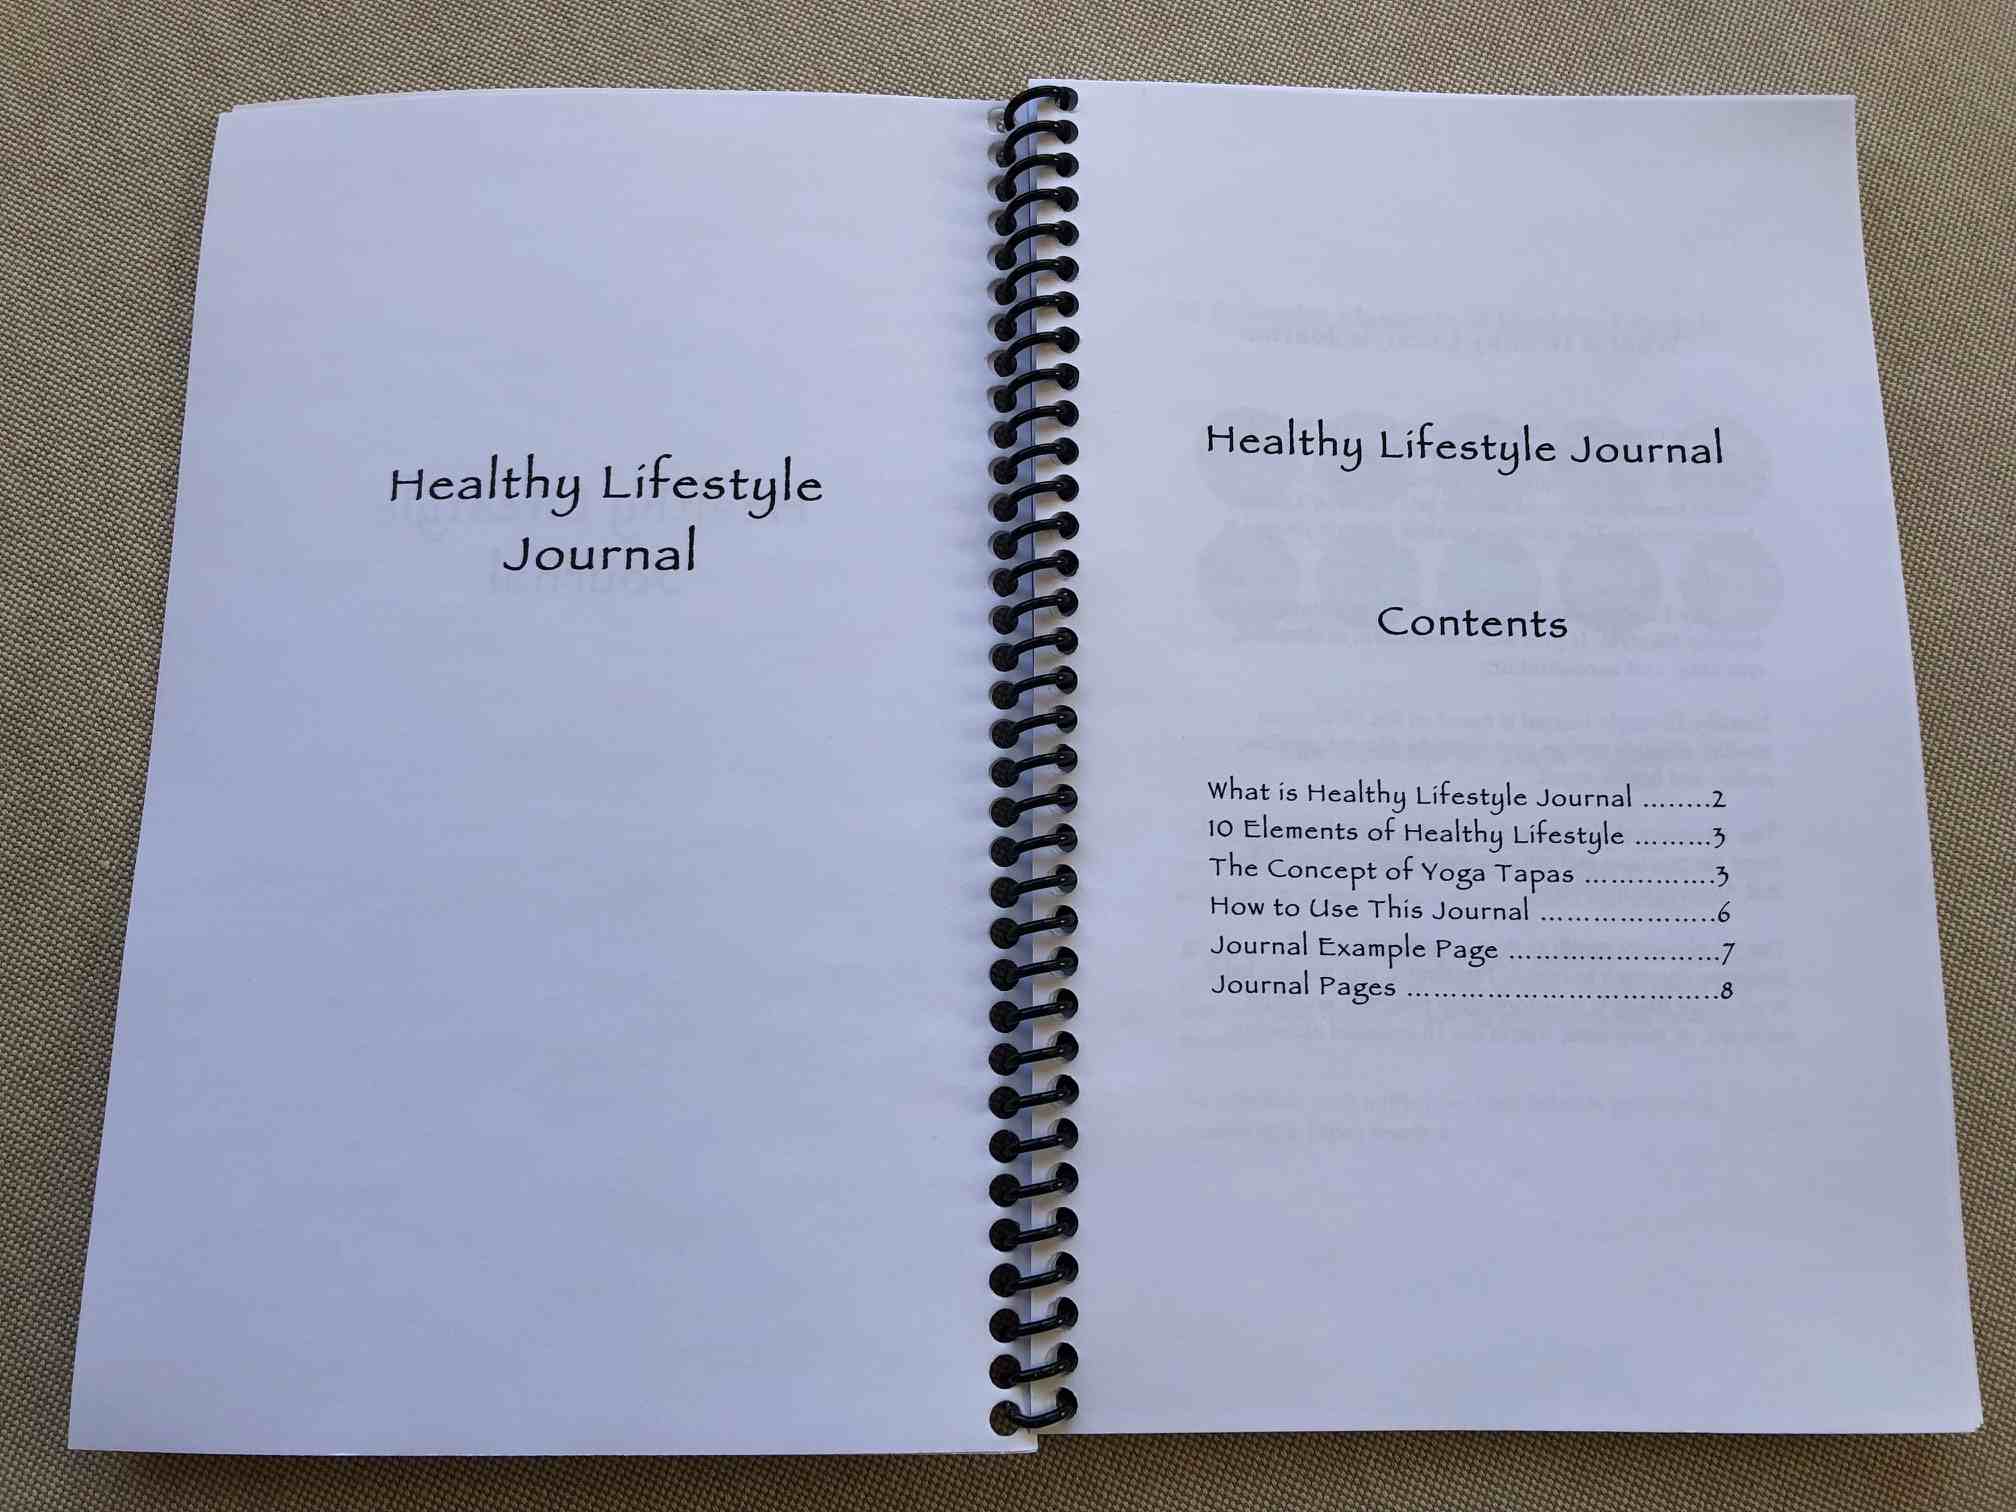 Healthy lifestyle journal